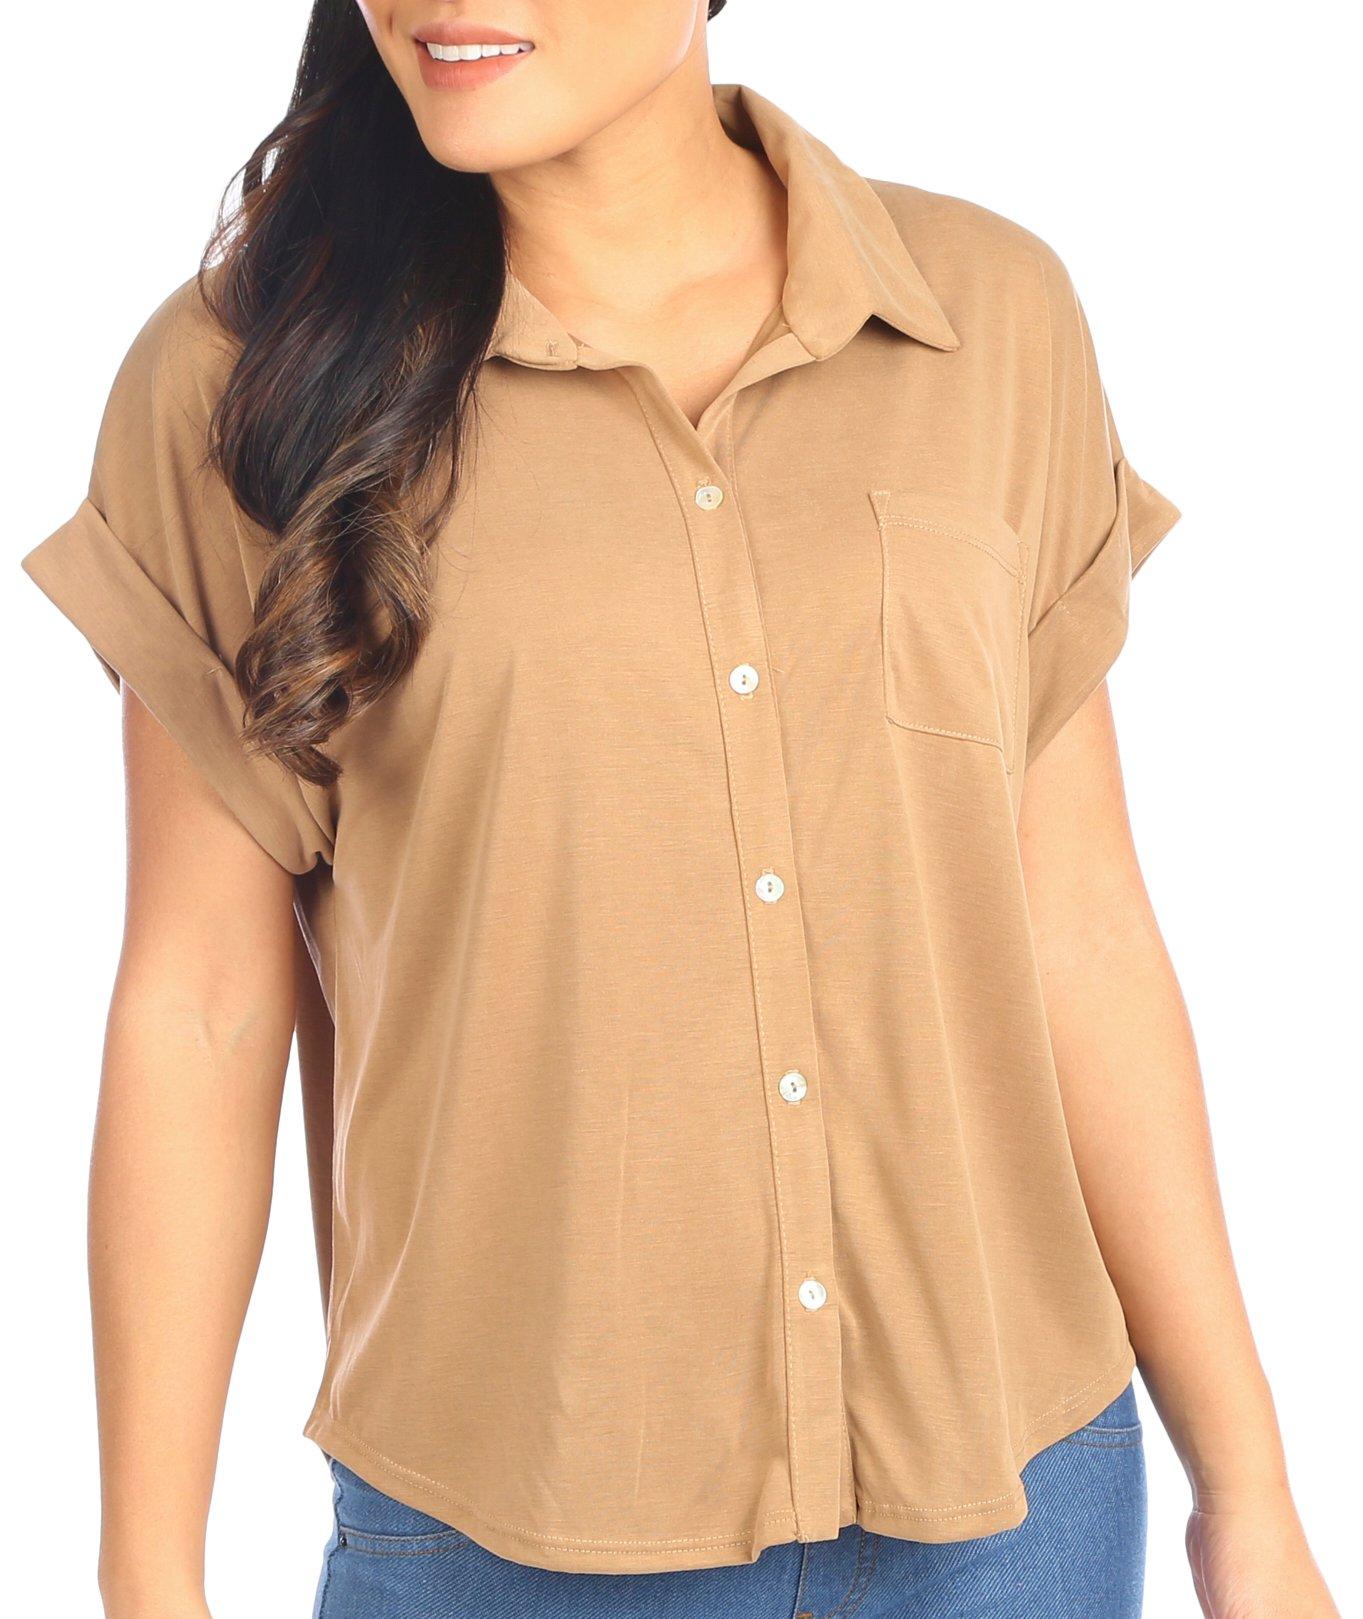 Womens Button Down Collared Short Sleeve Top